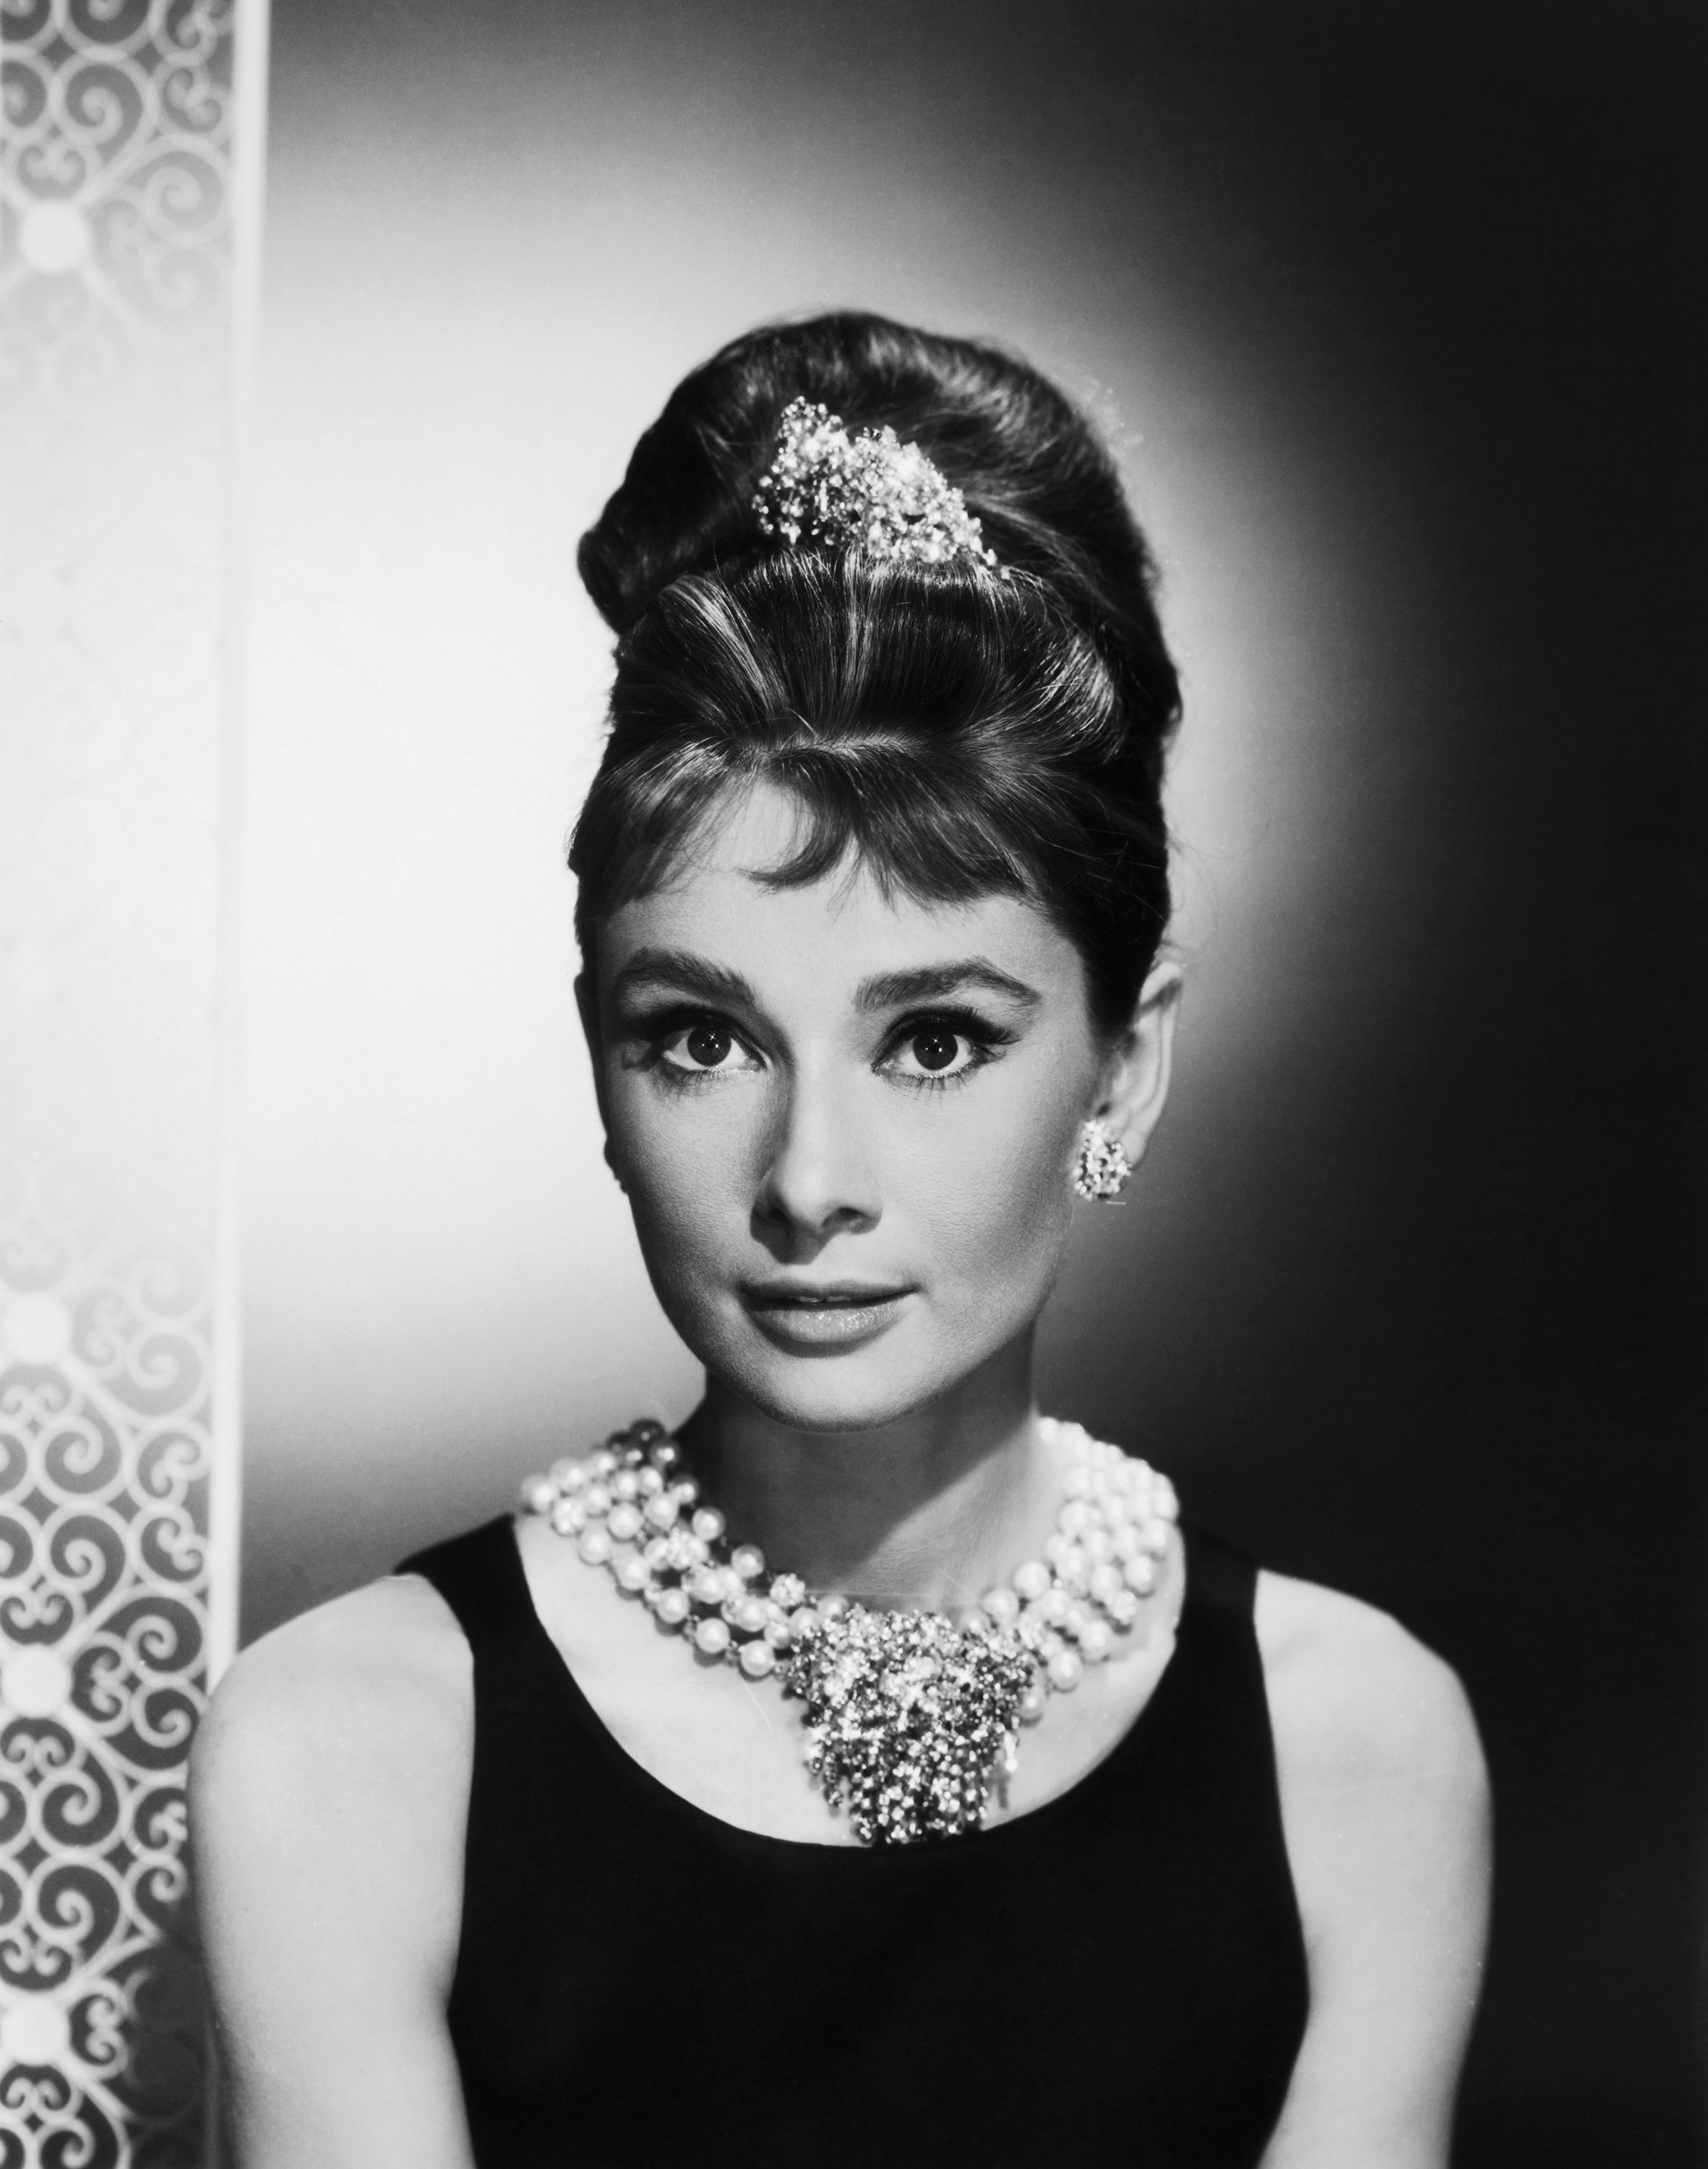 Hubert de Givenchy and Audrey Hepburn's Fashion Romance | AnOther